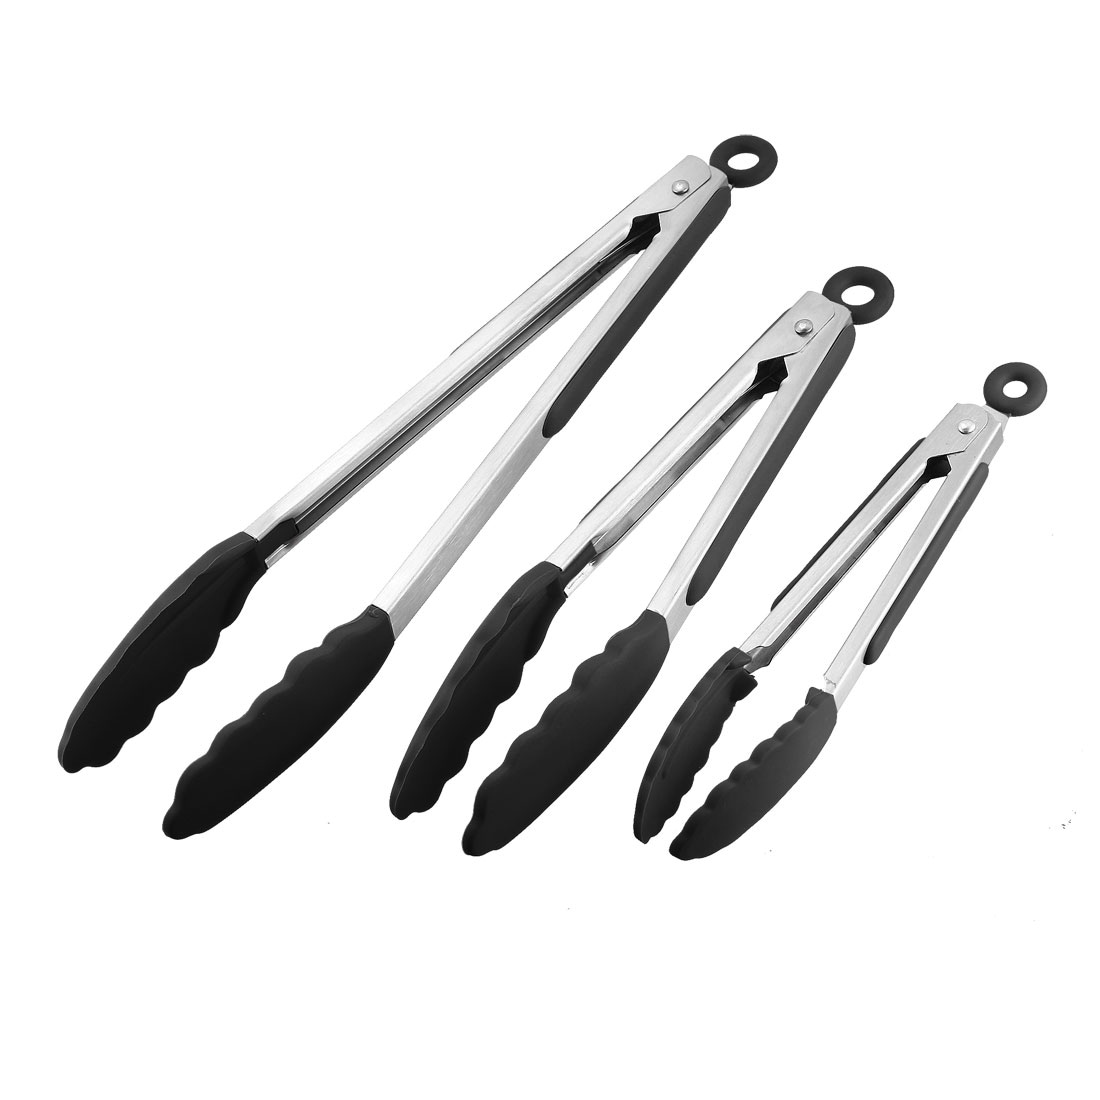 https://ak1.ostkcdn.com/images/products/is/images/direct/aa5216ca39cd32552c59312acdf017c5d511e0aa/Kitchen-Tongs-Stainless-Steel-Locking-Tong-Set-of-3-7-inch-9-inch-12-inch-Black.jpg